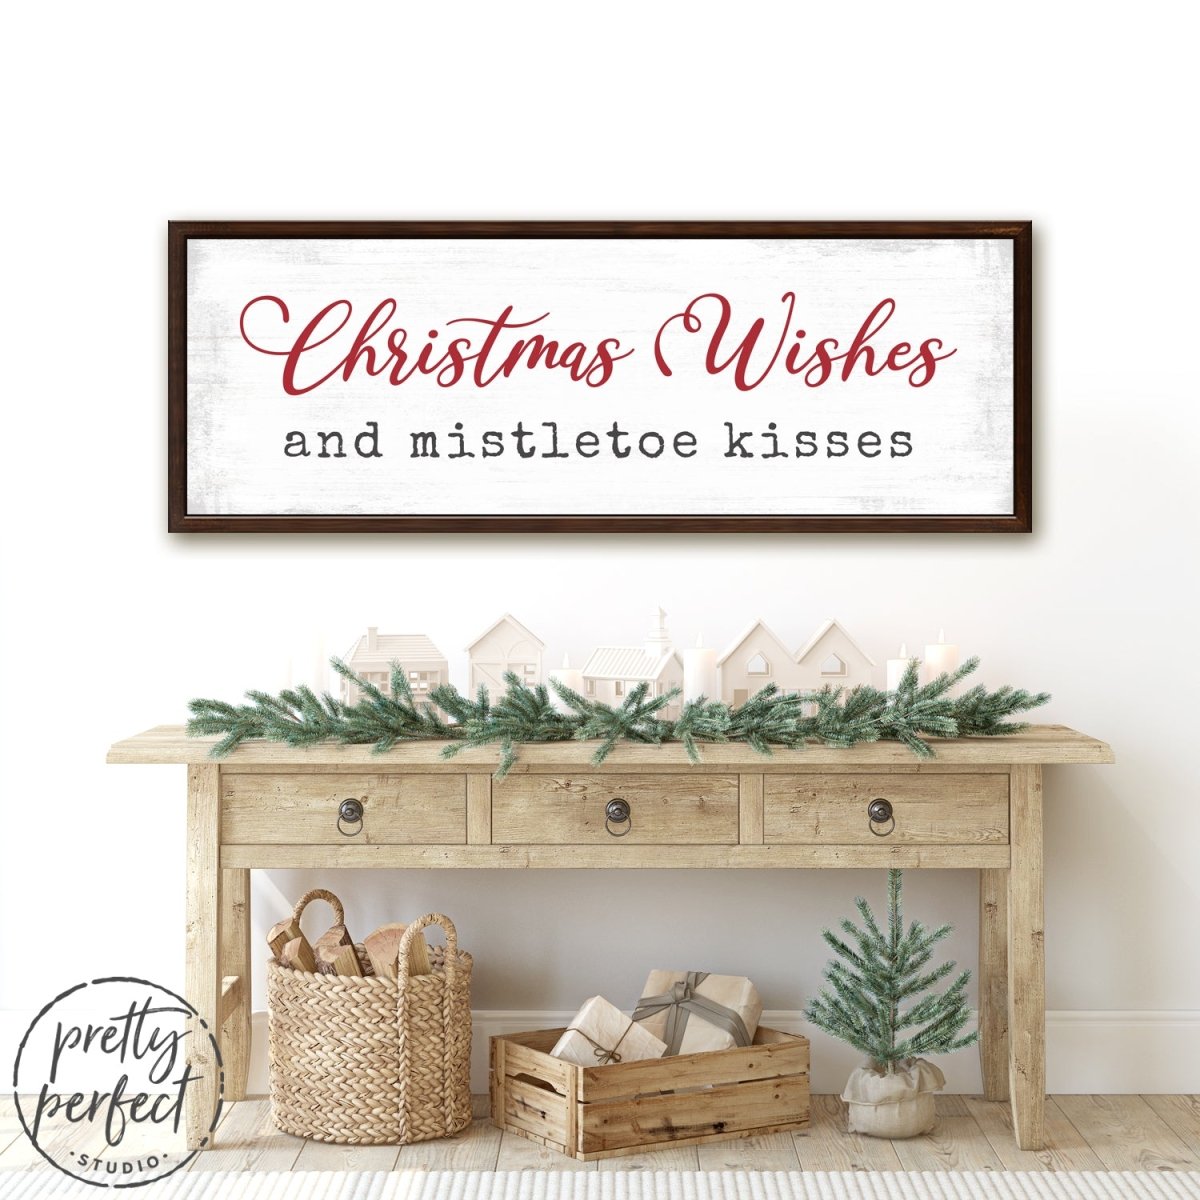 Christmas Wishes and Mistletoe Kisses Sign Above Table in Entryway - Pretty Perfect Studio